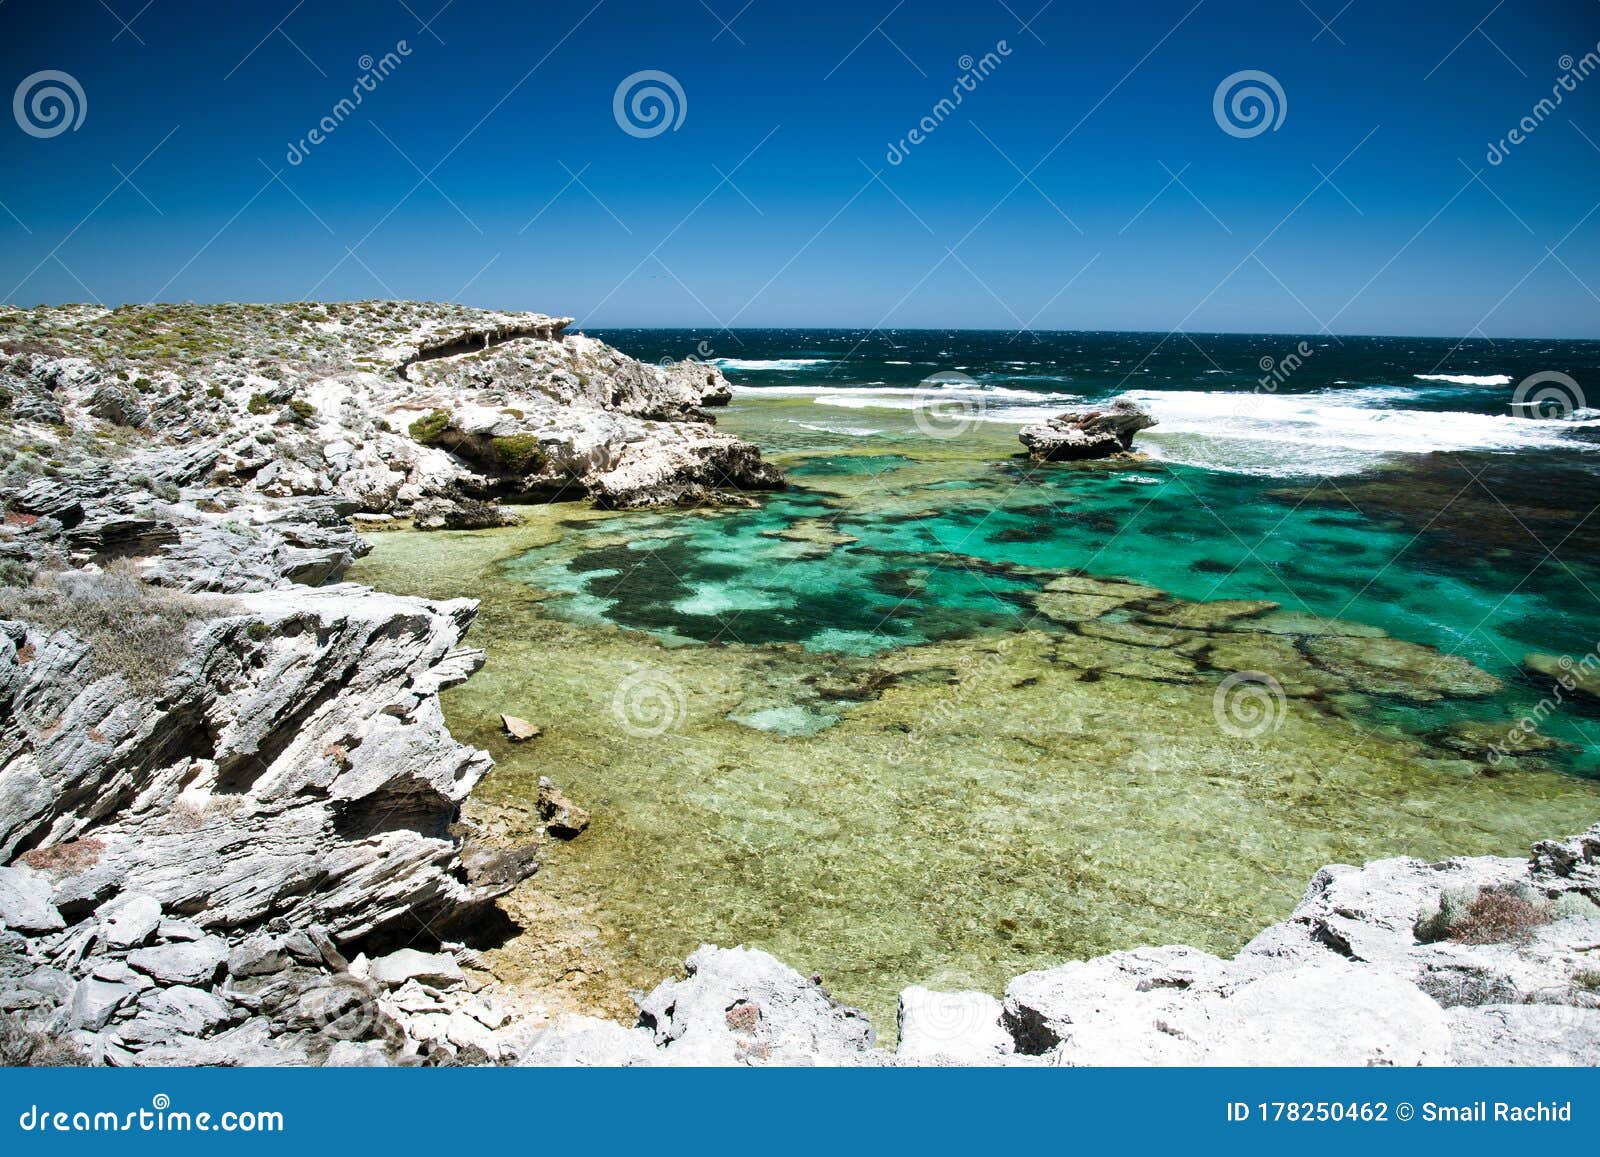 whites rocks and cristal clear water in rottnest island